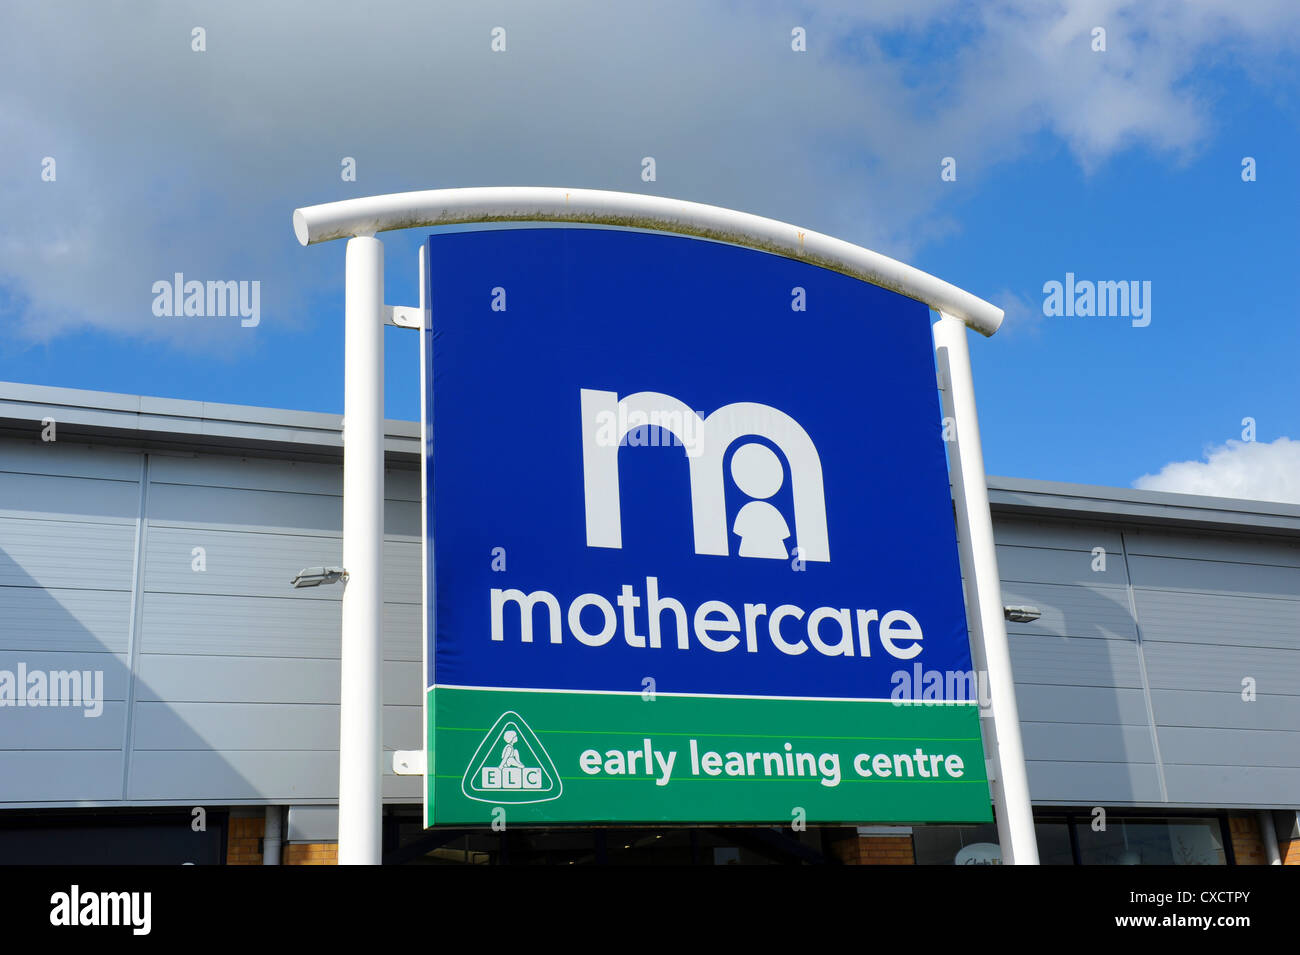 Mothercare Early Learning Centre logo shop sign uk Stock Photo